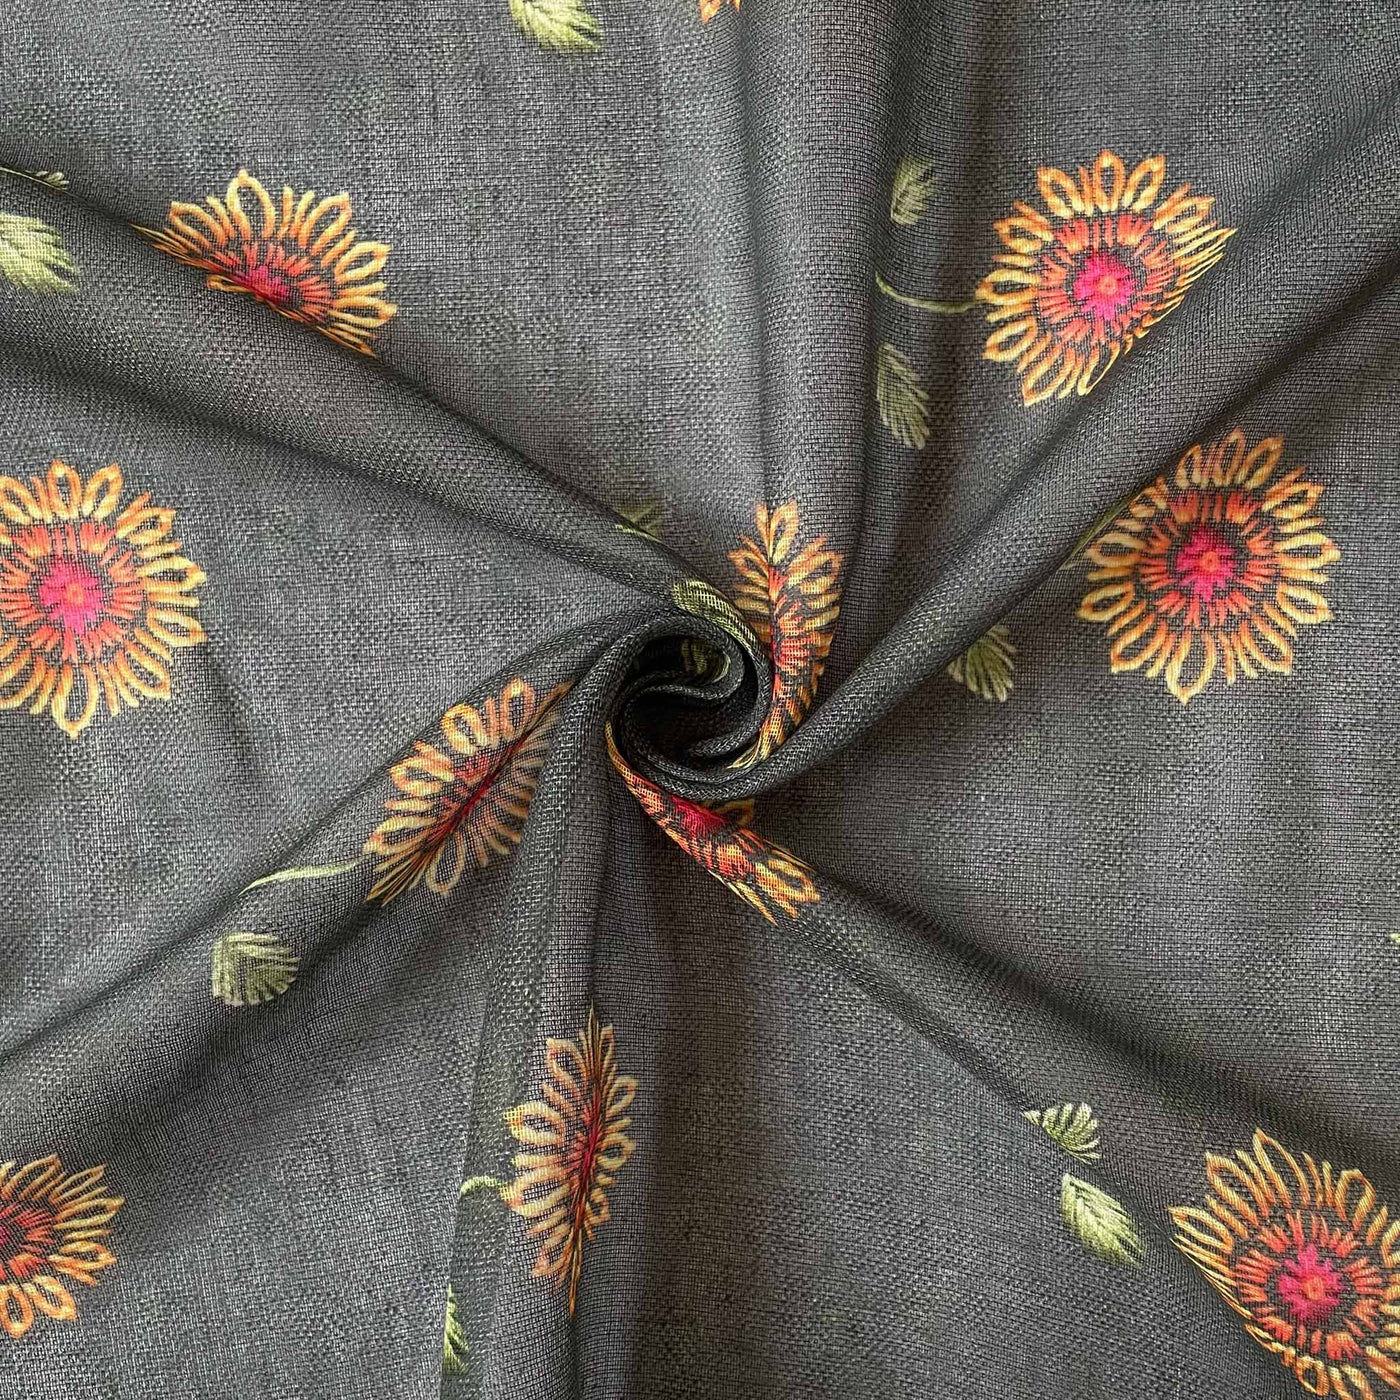 Digital Printed Linen Neps Cut Piece (CUT PIECE) Dark Grey and Orange Giant Sunflowers Digital Printed Linen Neps Fabric (Width 44 Inches)